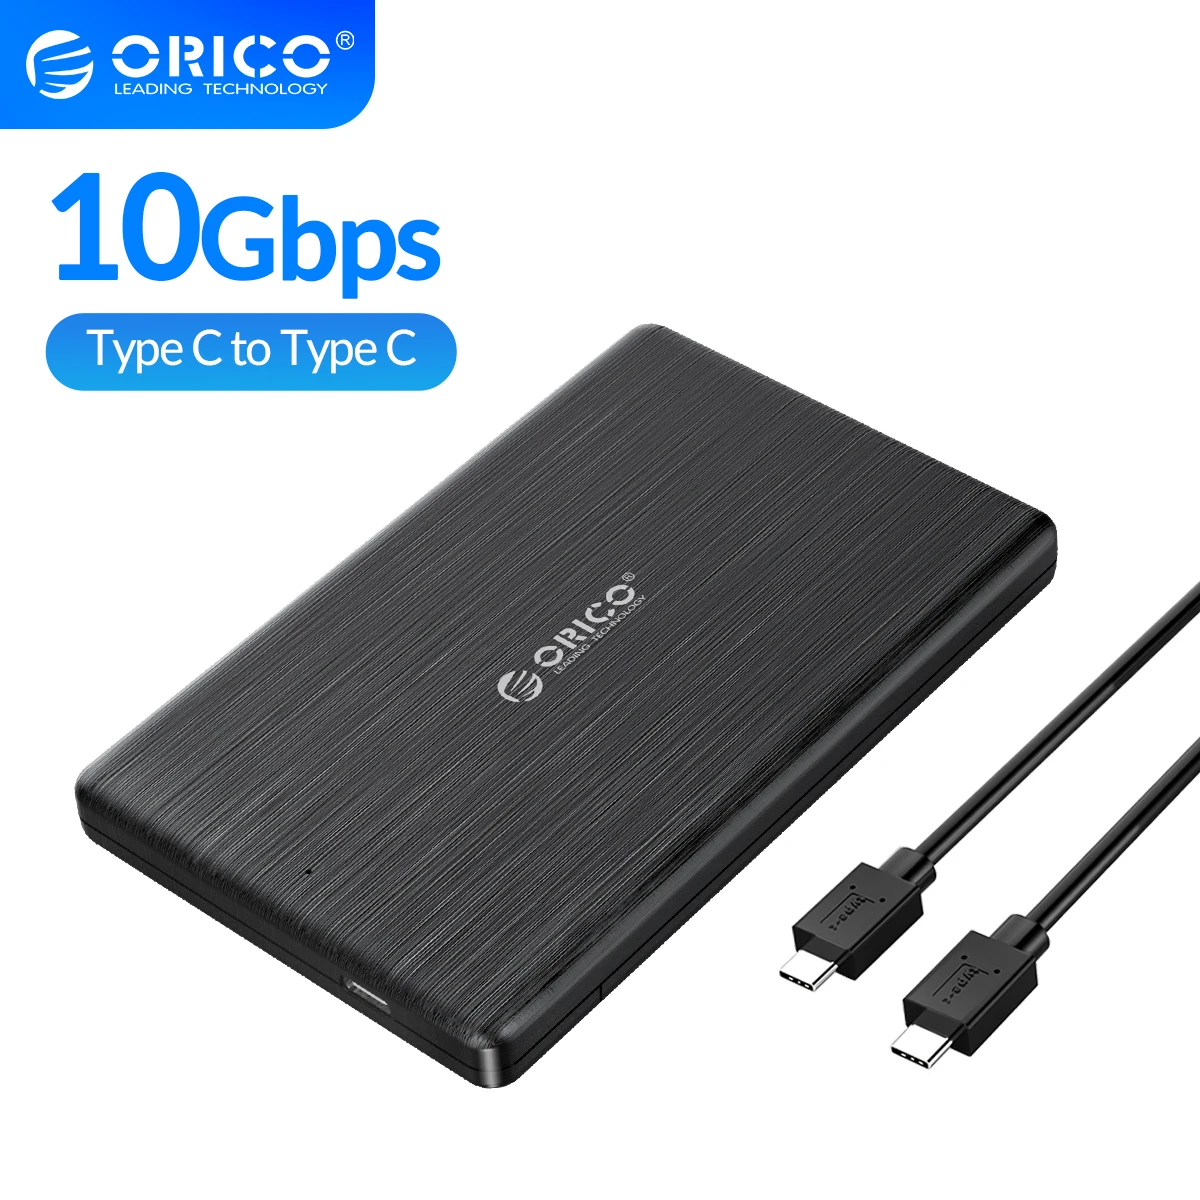 

ORICO 2.5'' External Hard Drive Case for 7mm SSD Case SATA HDD Enclosure with Type C to Type C Cable HDD Box for PS4,xbox,PC,TV